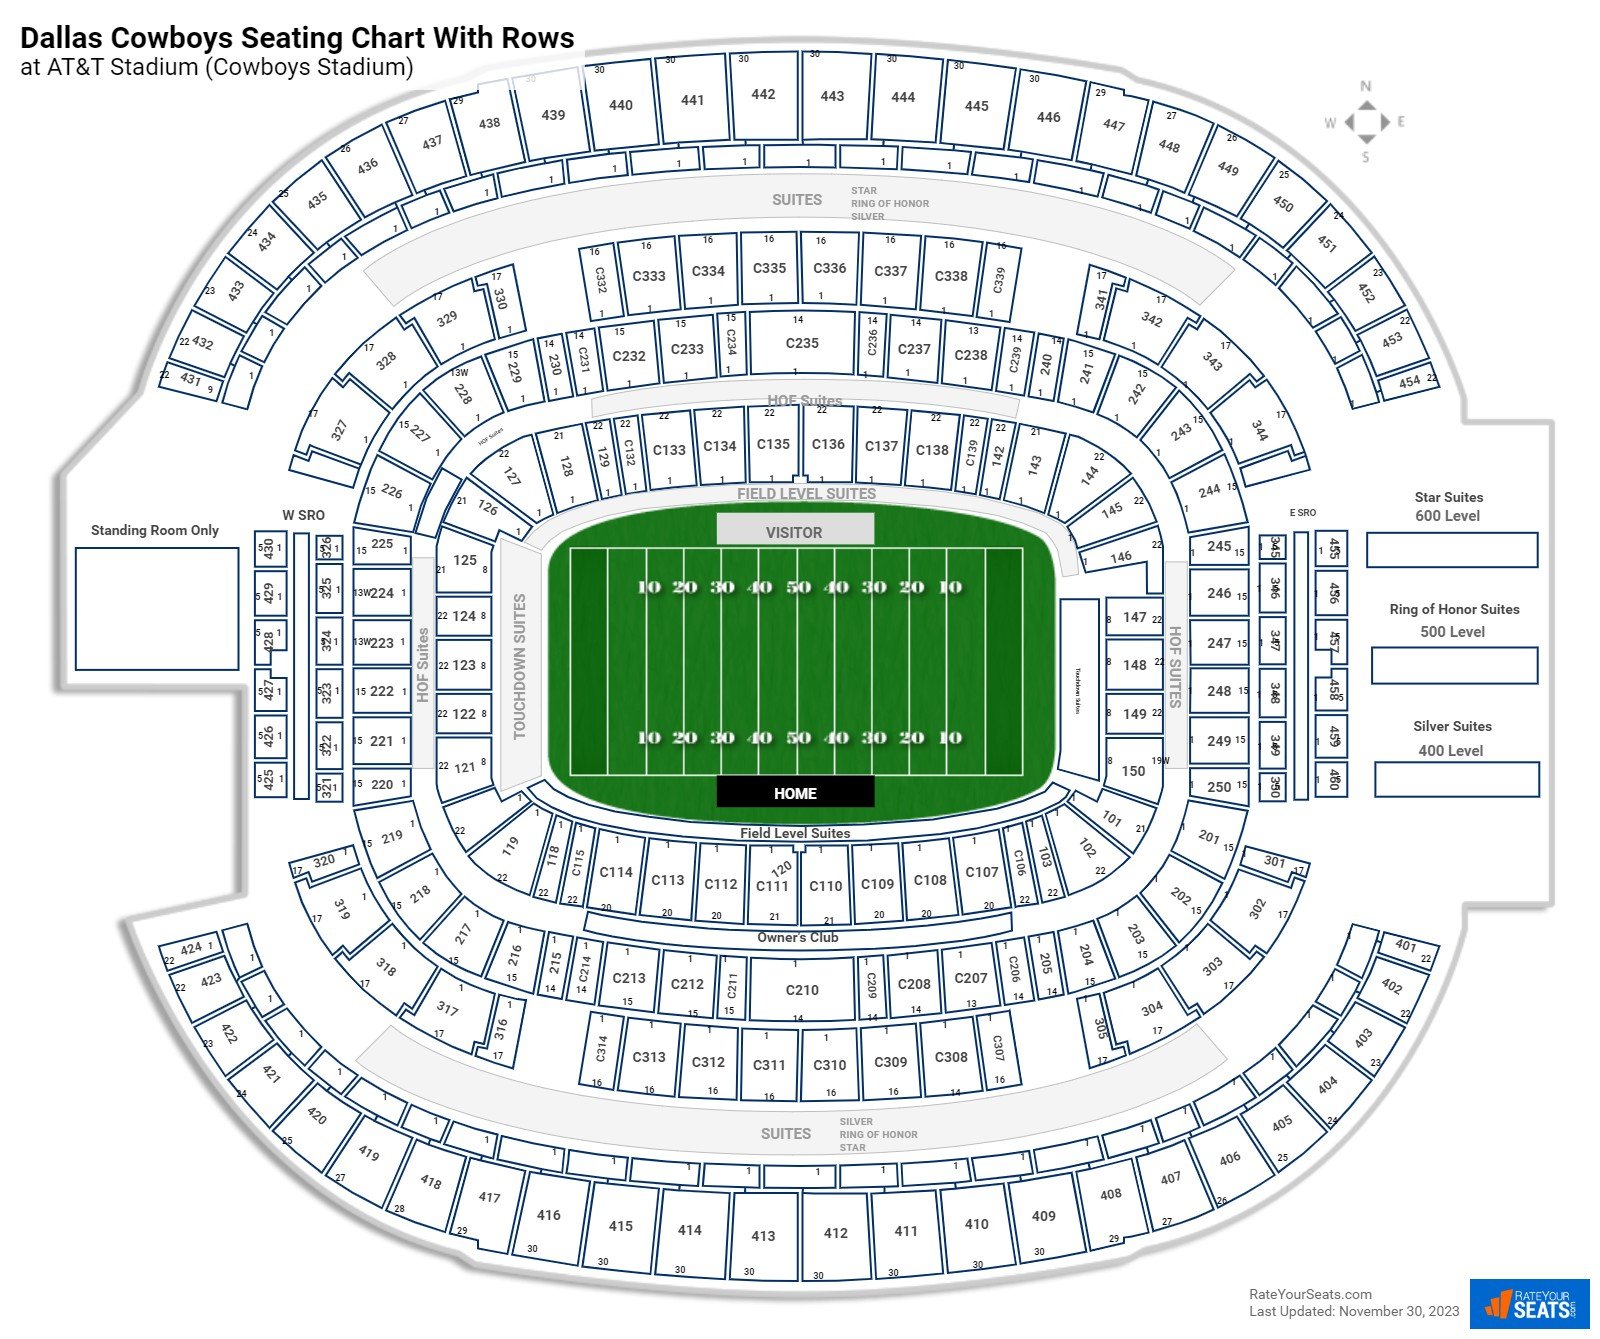 AT&T Stadium (Cowboys Stadium) seating chart with row numbers